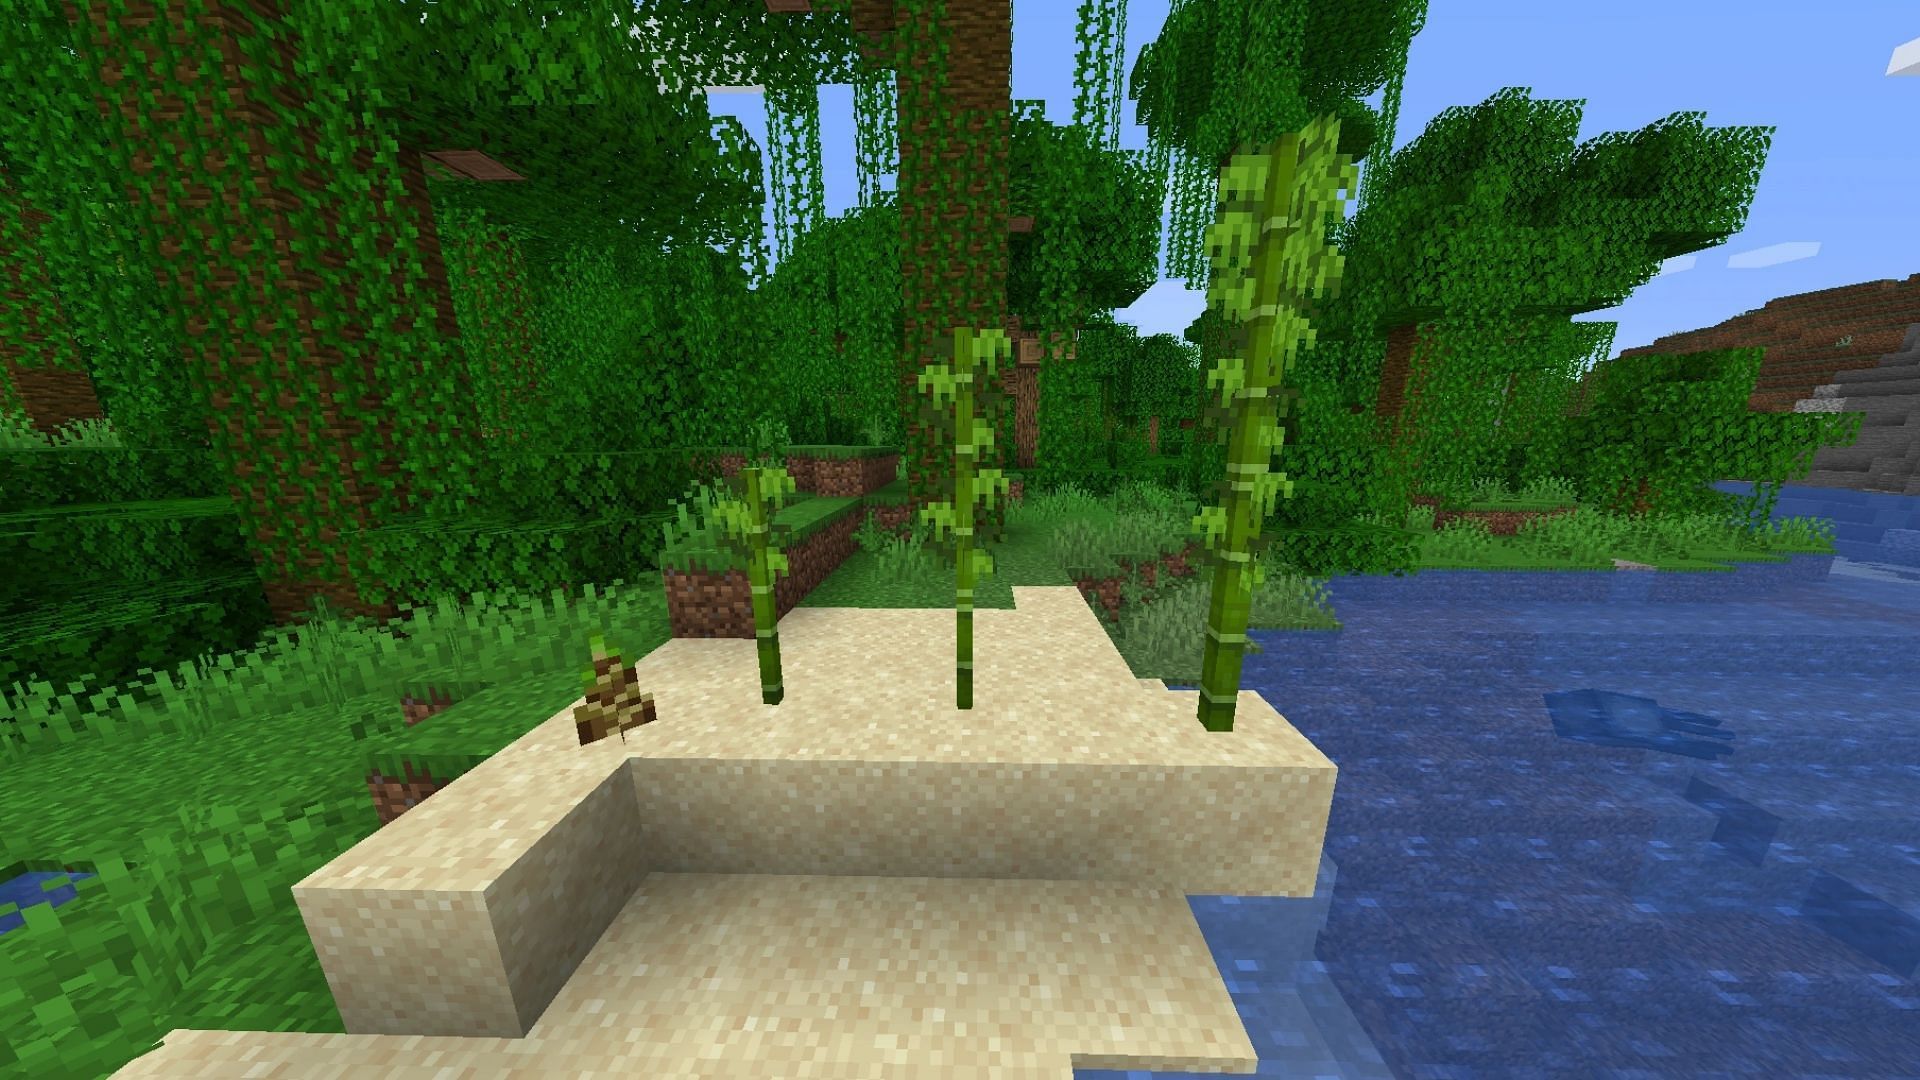 Different stages of bamboo growth in Minecraft 1.20 (Image via Mojang)